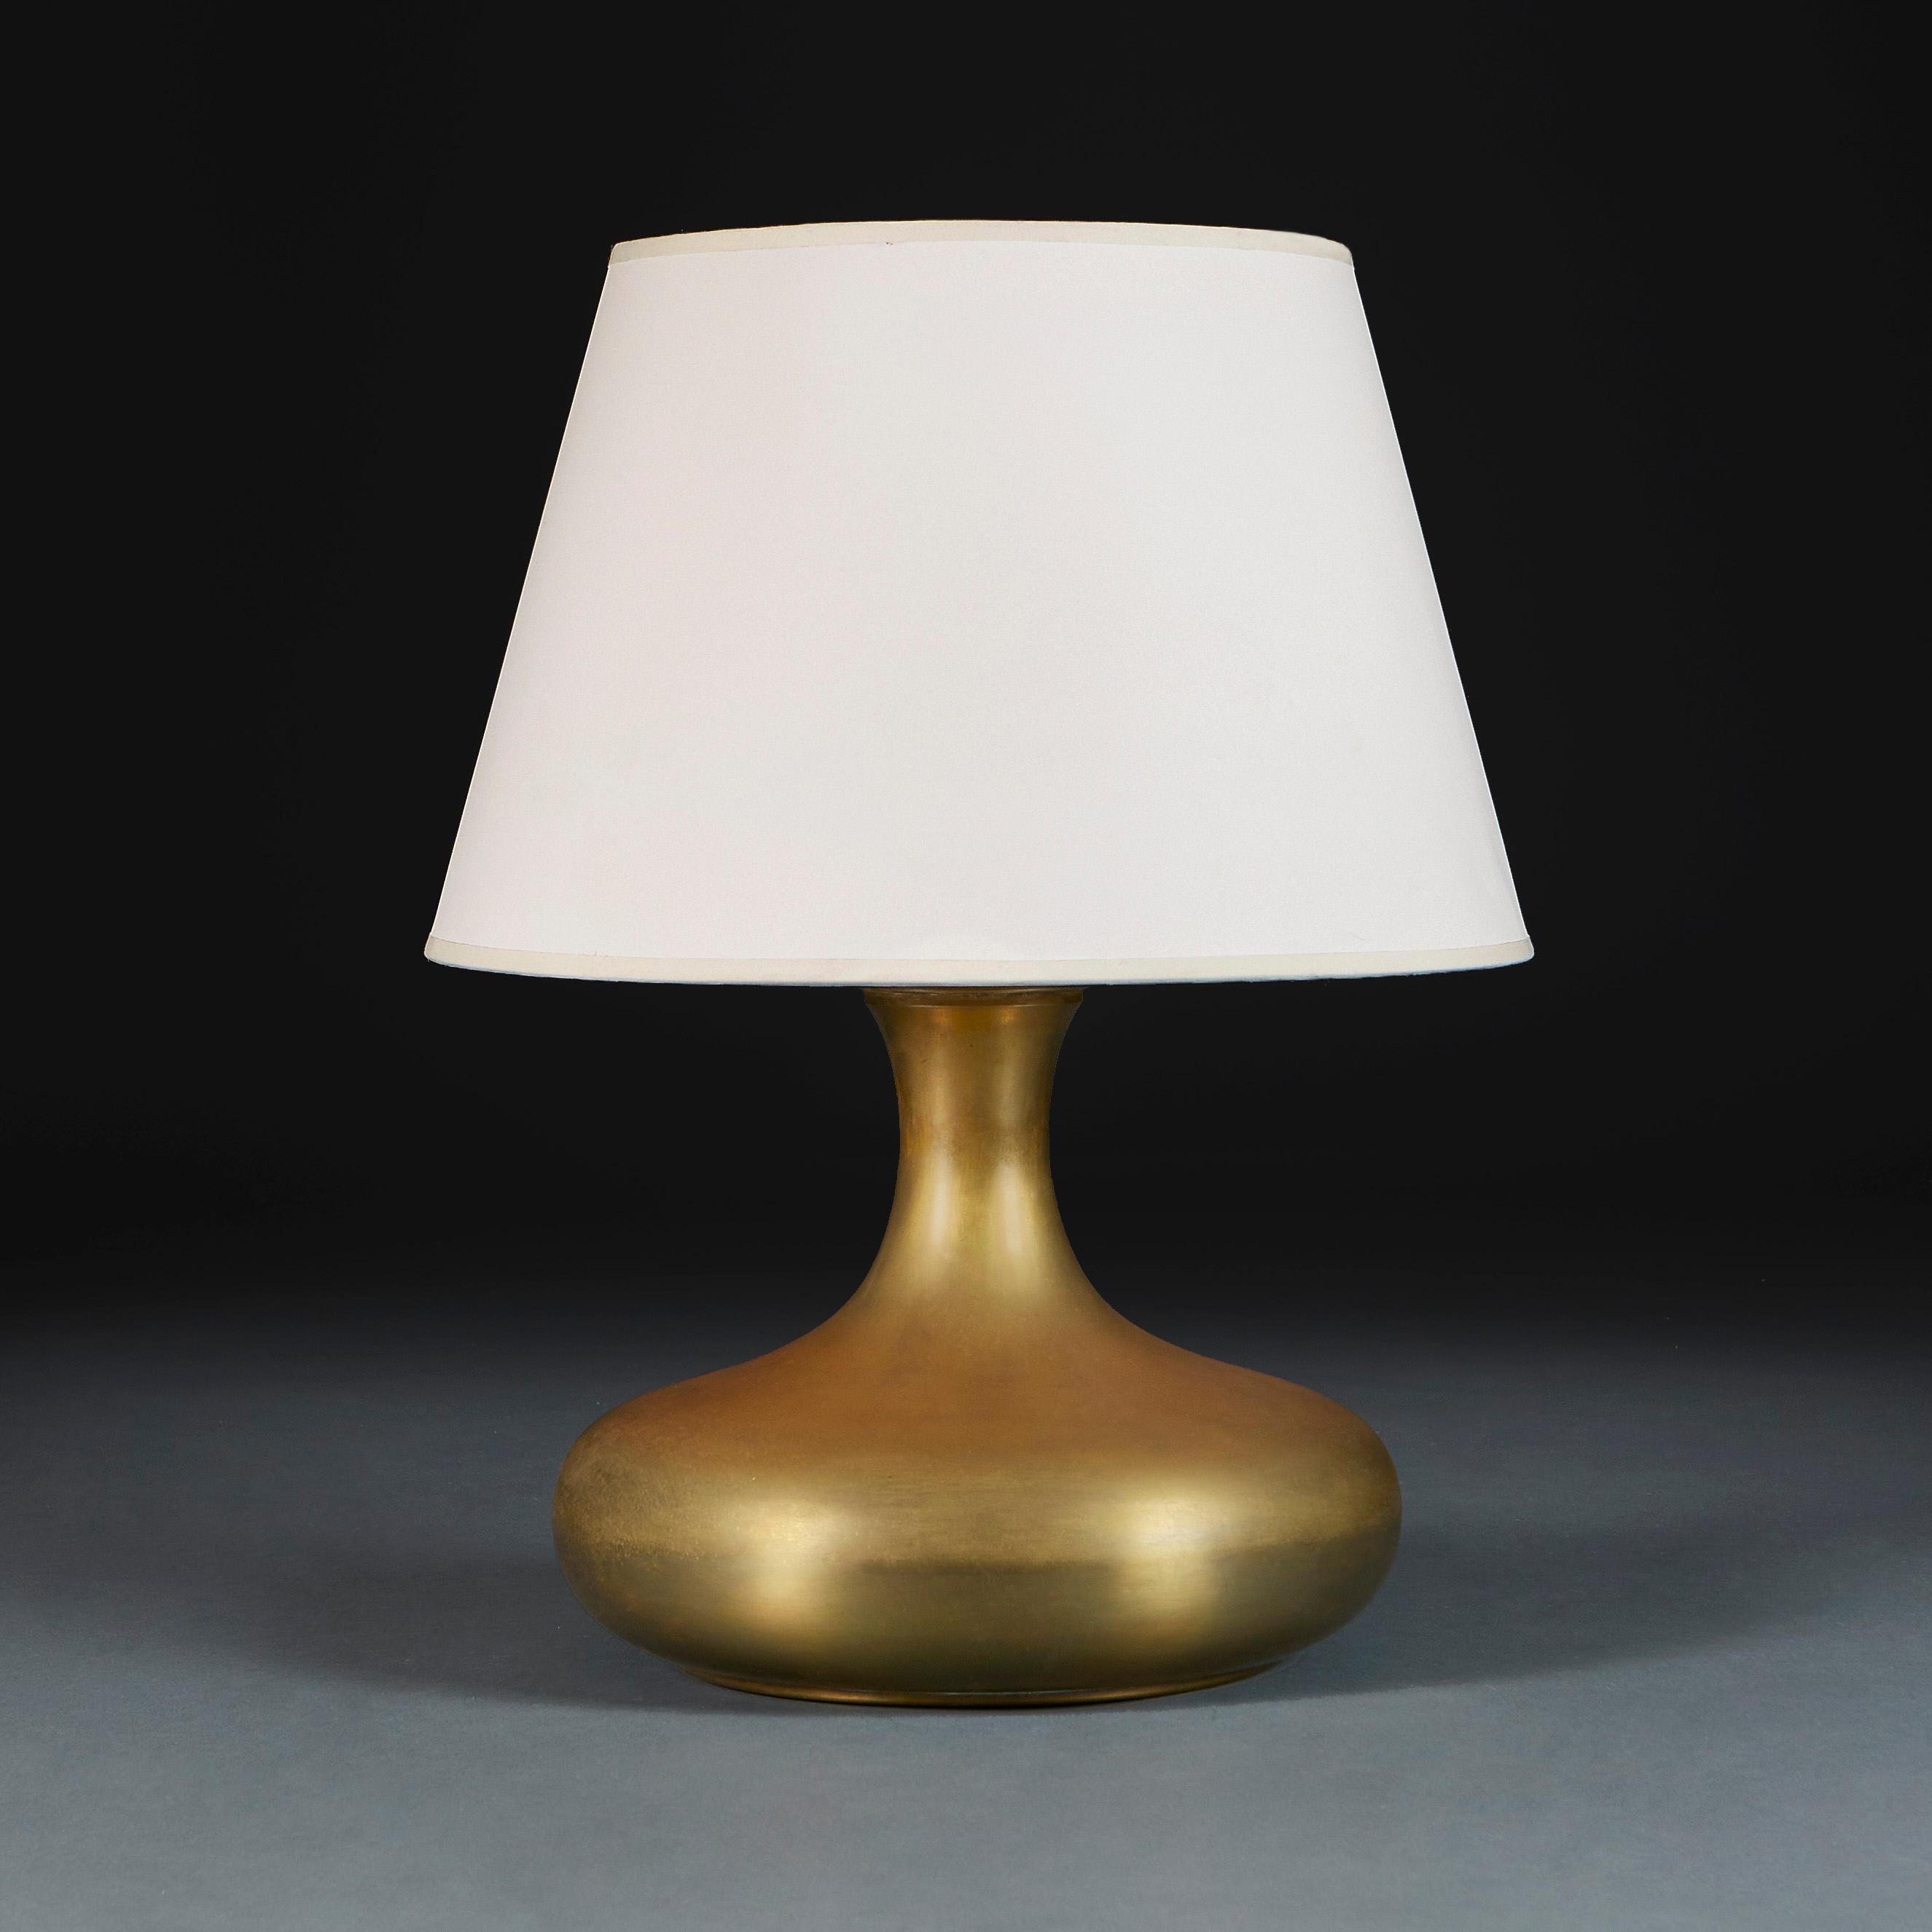 Denmark, circa 1930

An early 20th century Danish patinated brass vase of rotund form with flared neck, now converted as a lamp.

Height of vase 28.00cm
Height with shade 53.00cm
Diameter of body 33.00cm

Please note: This is currently wired for the